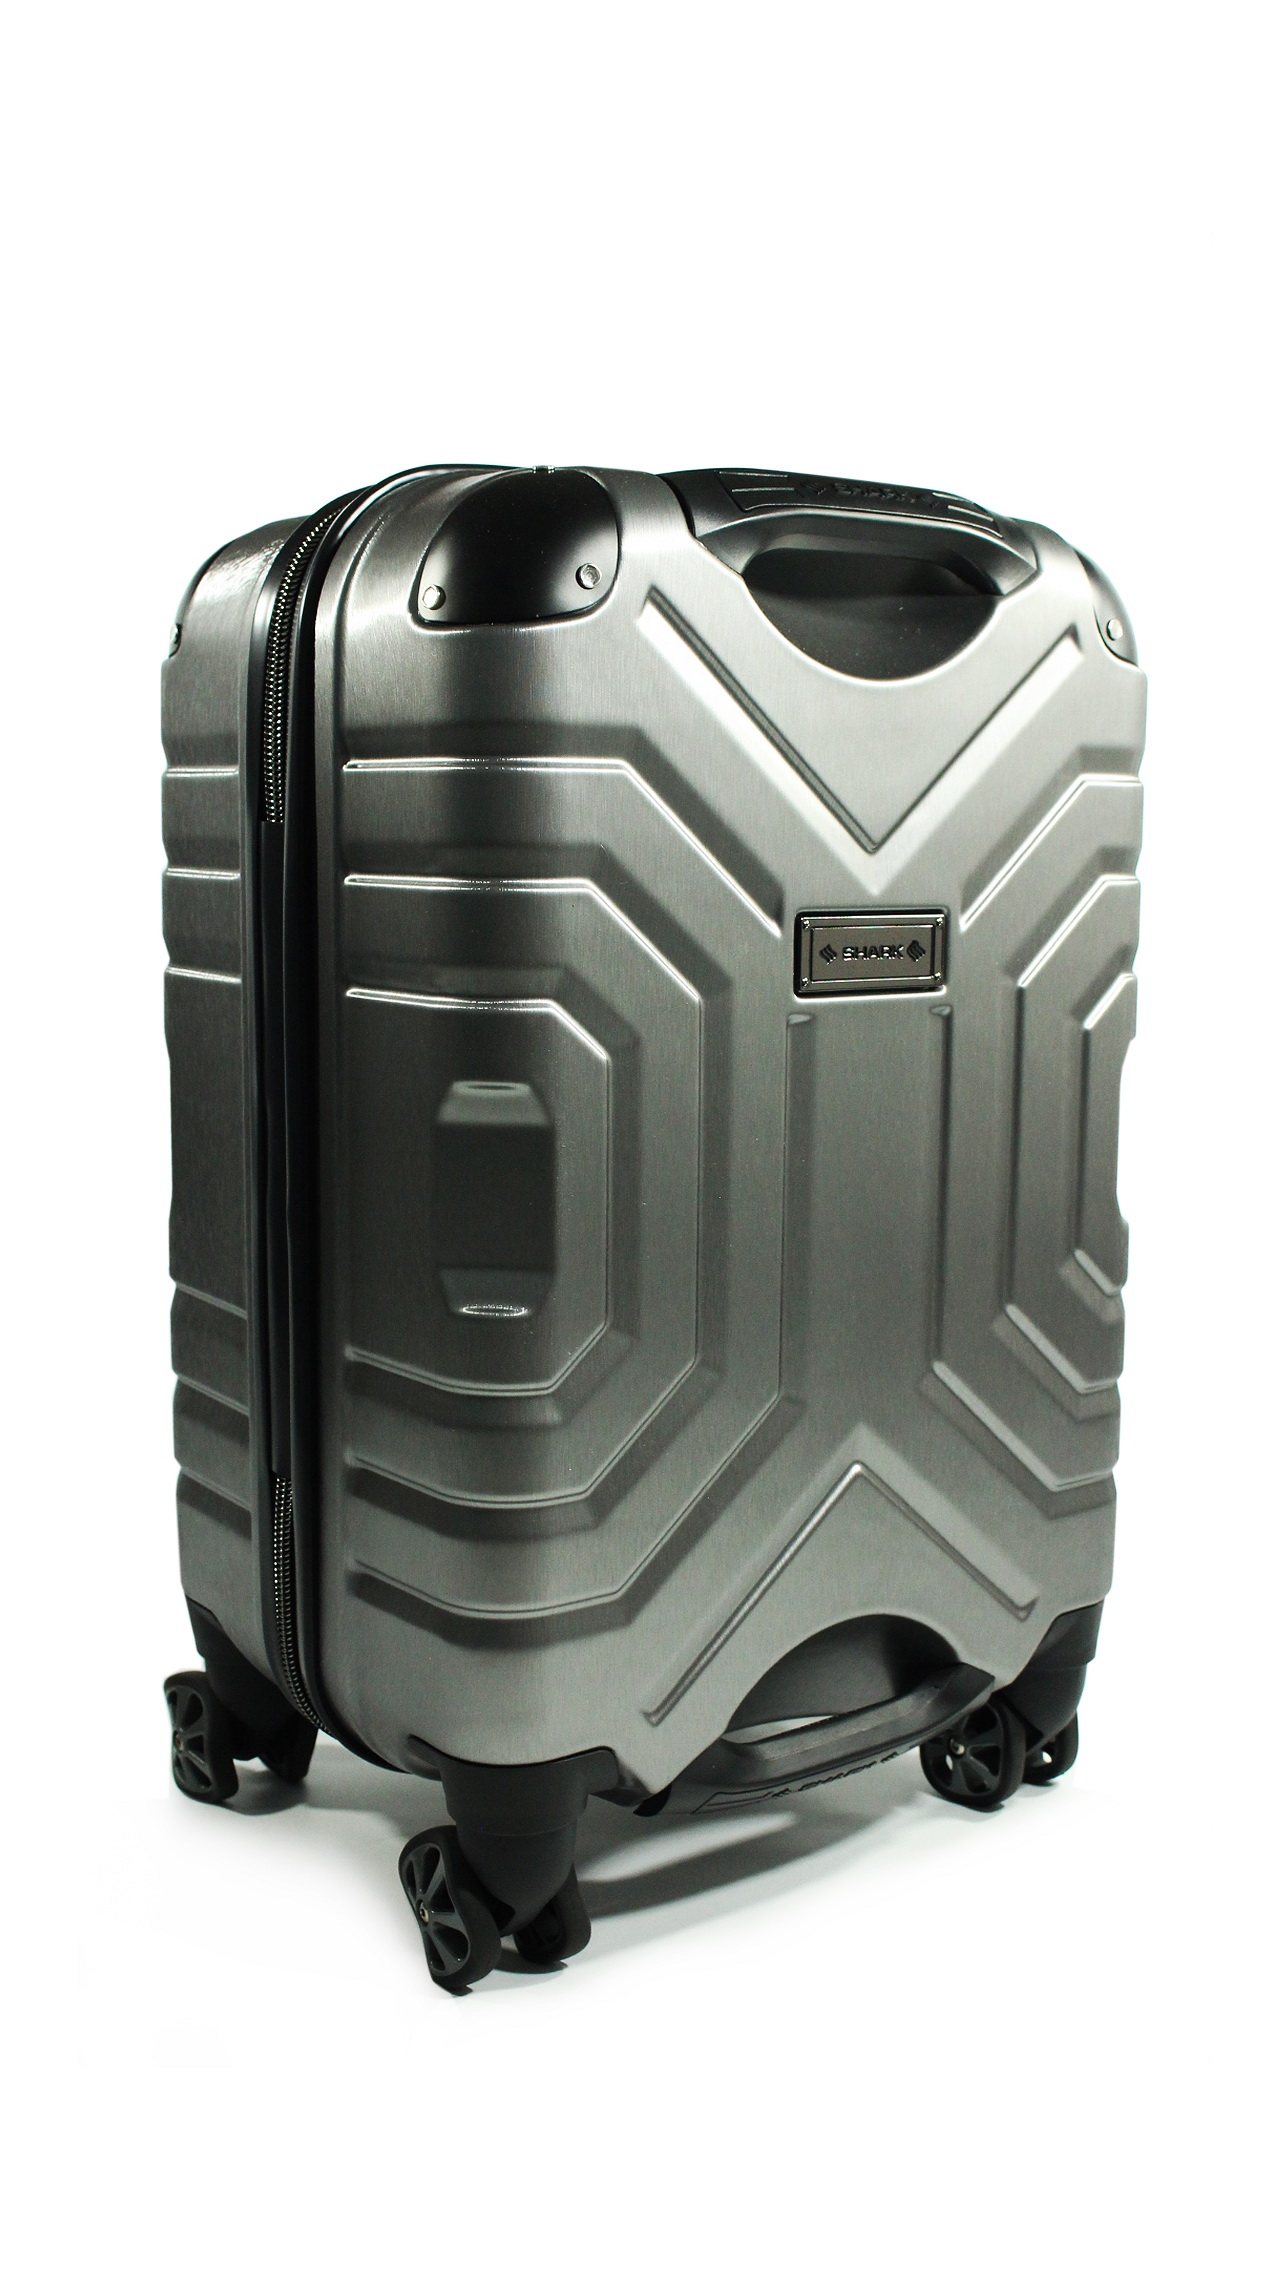 Carry-On Luggage - Shark (Silver/Black) angle view